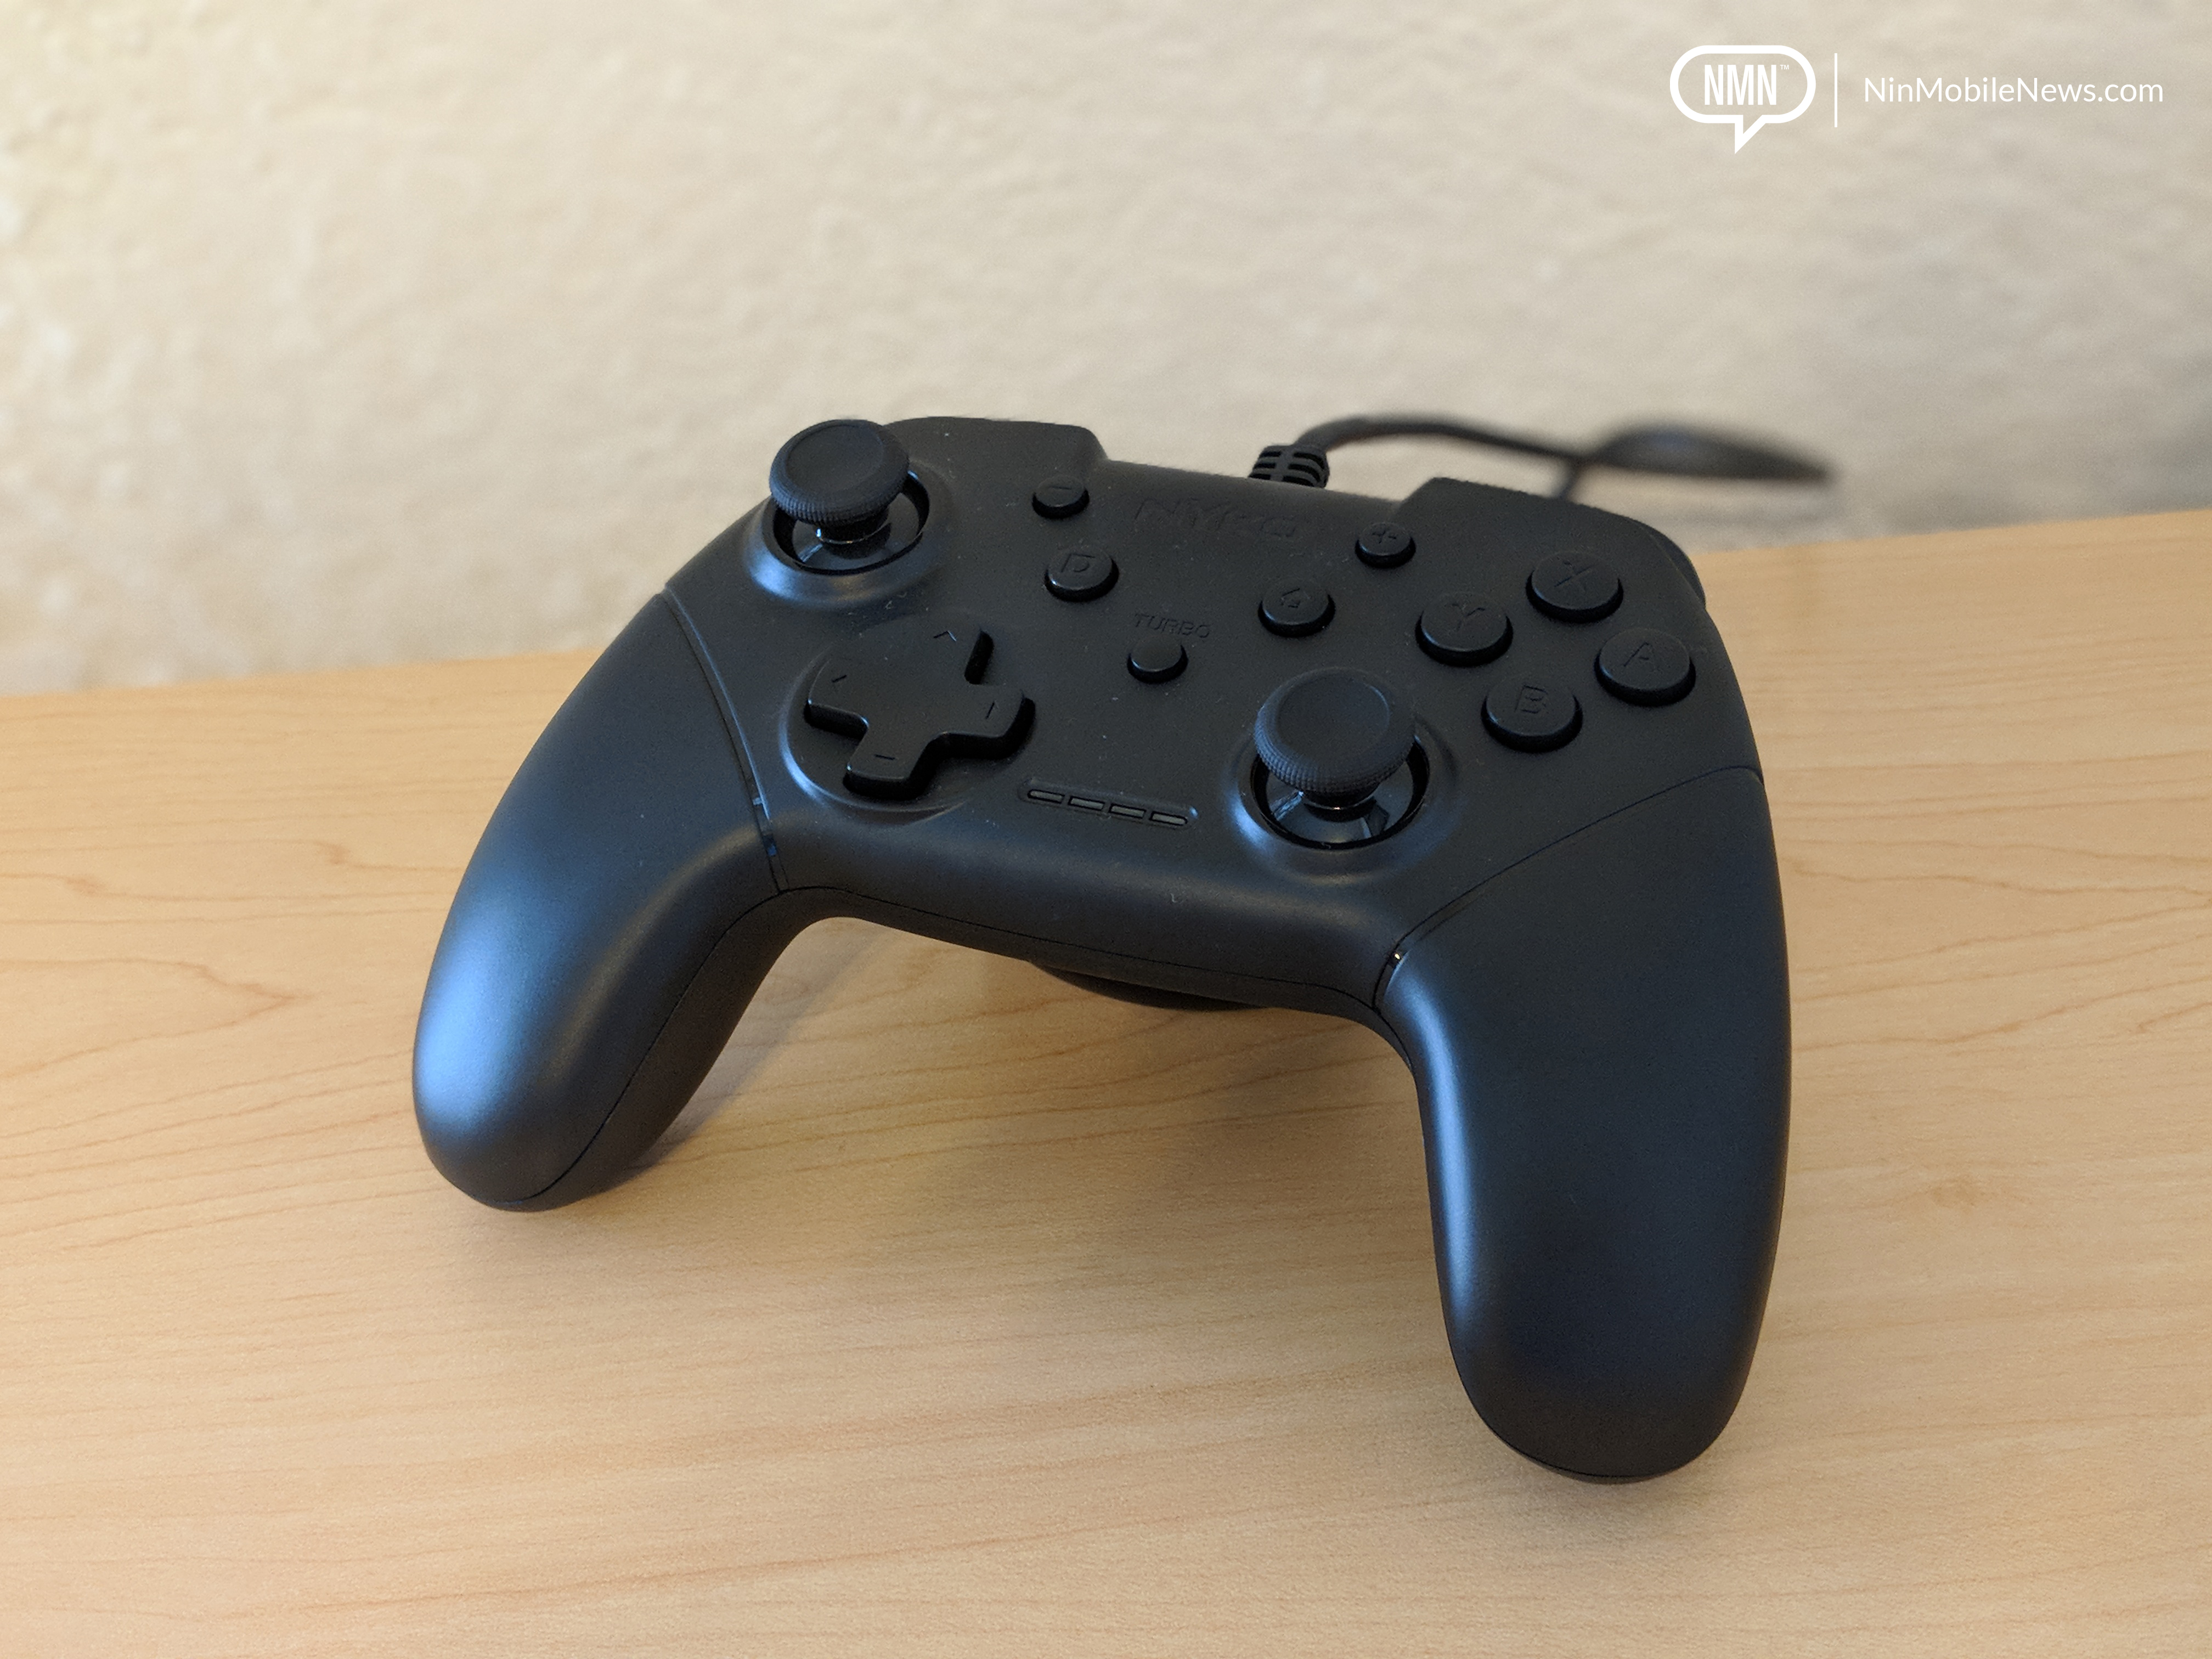 nyko pro controller switch